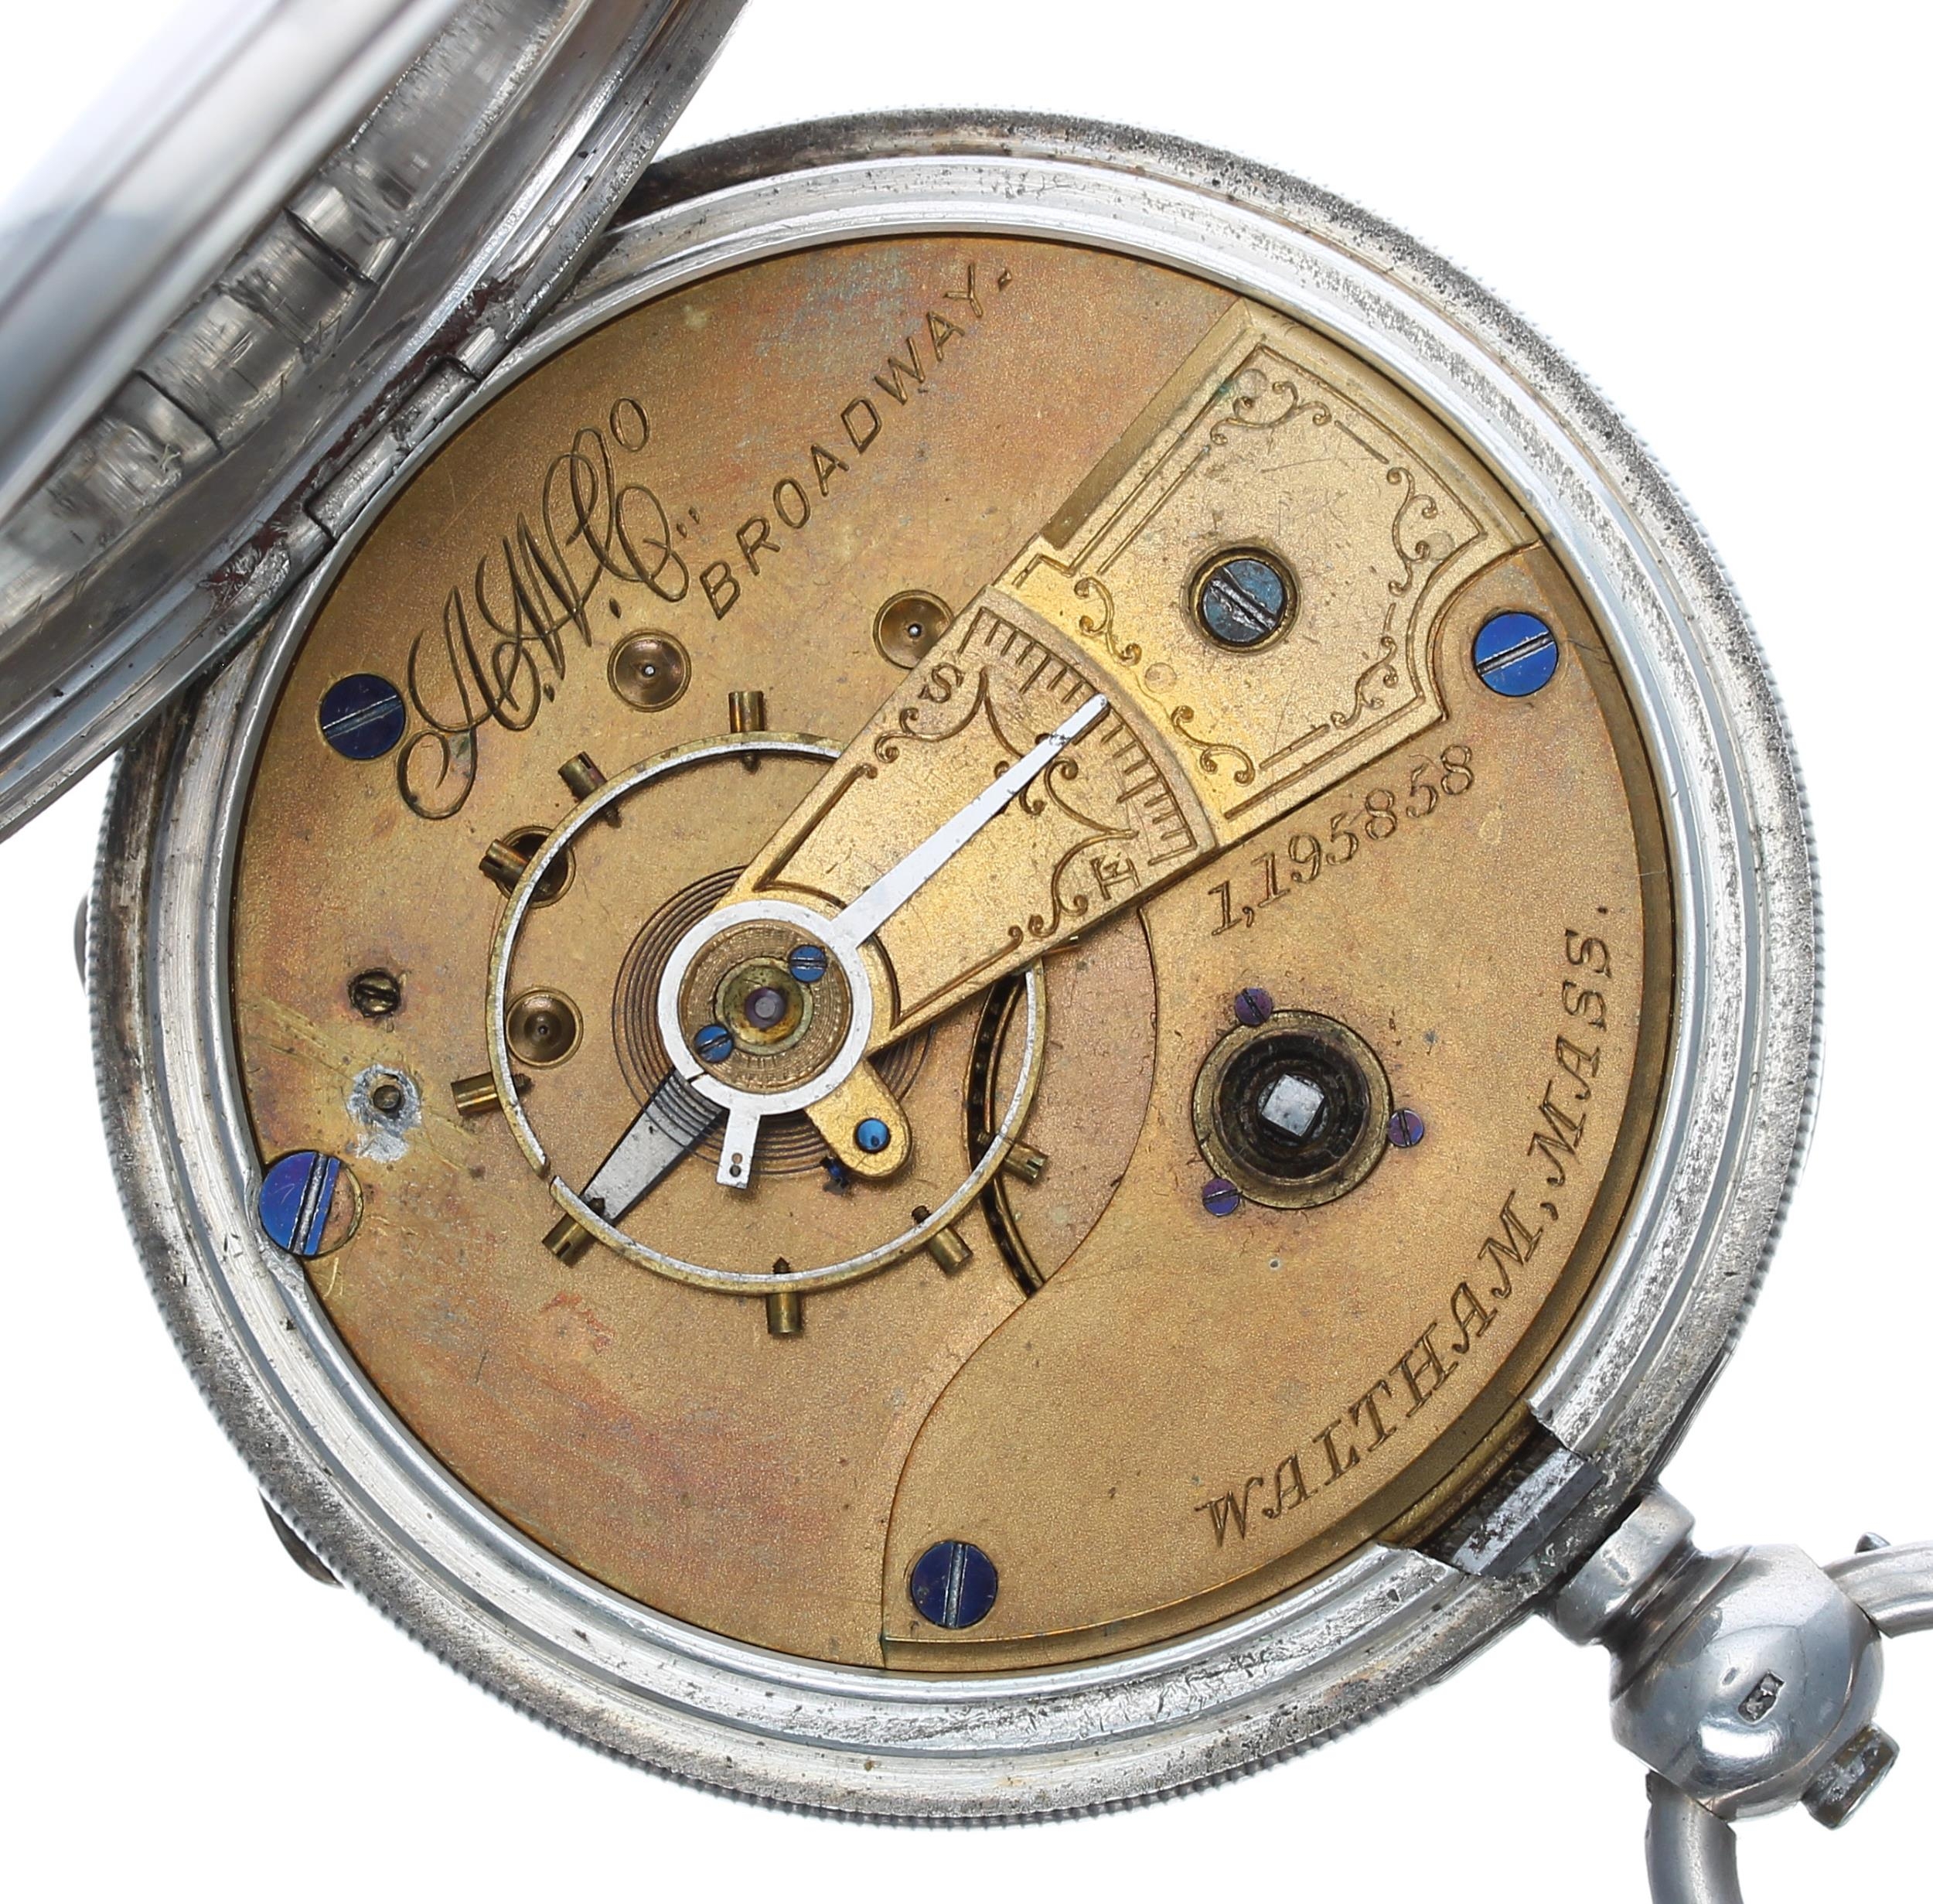 American Waltham 'Broadway' silver lever pocket watch, circa 1878, signed movement, no. 1195858, - Image 3 of 4